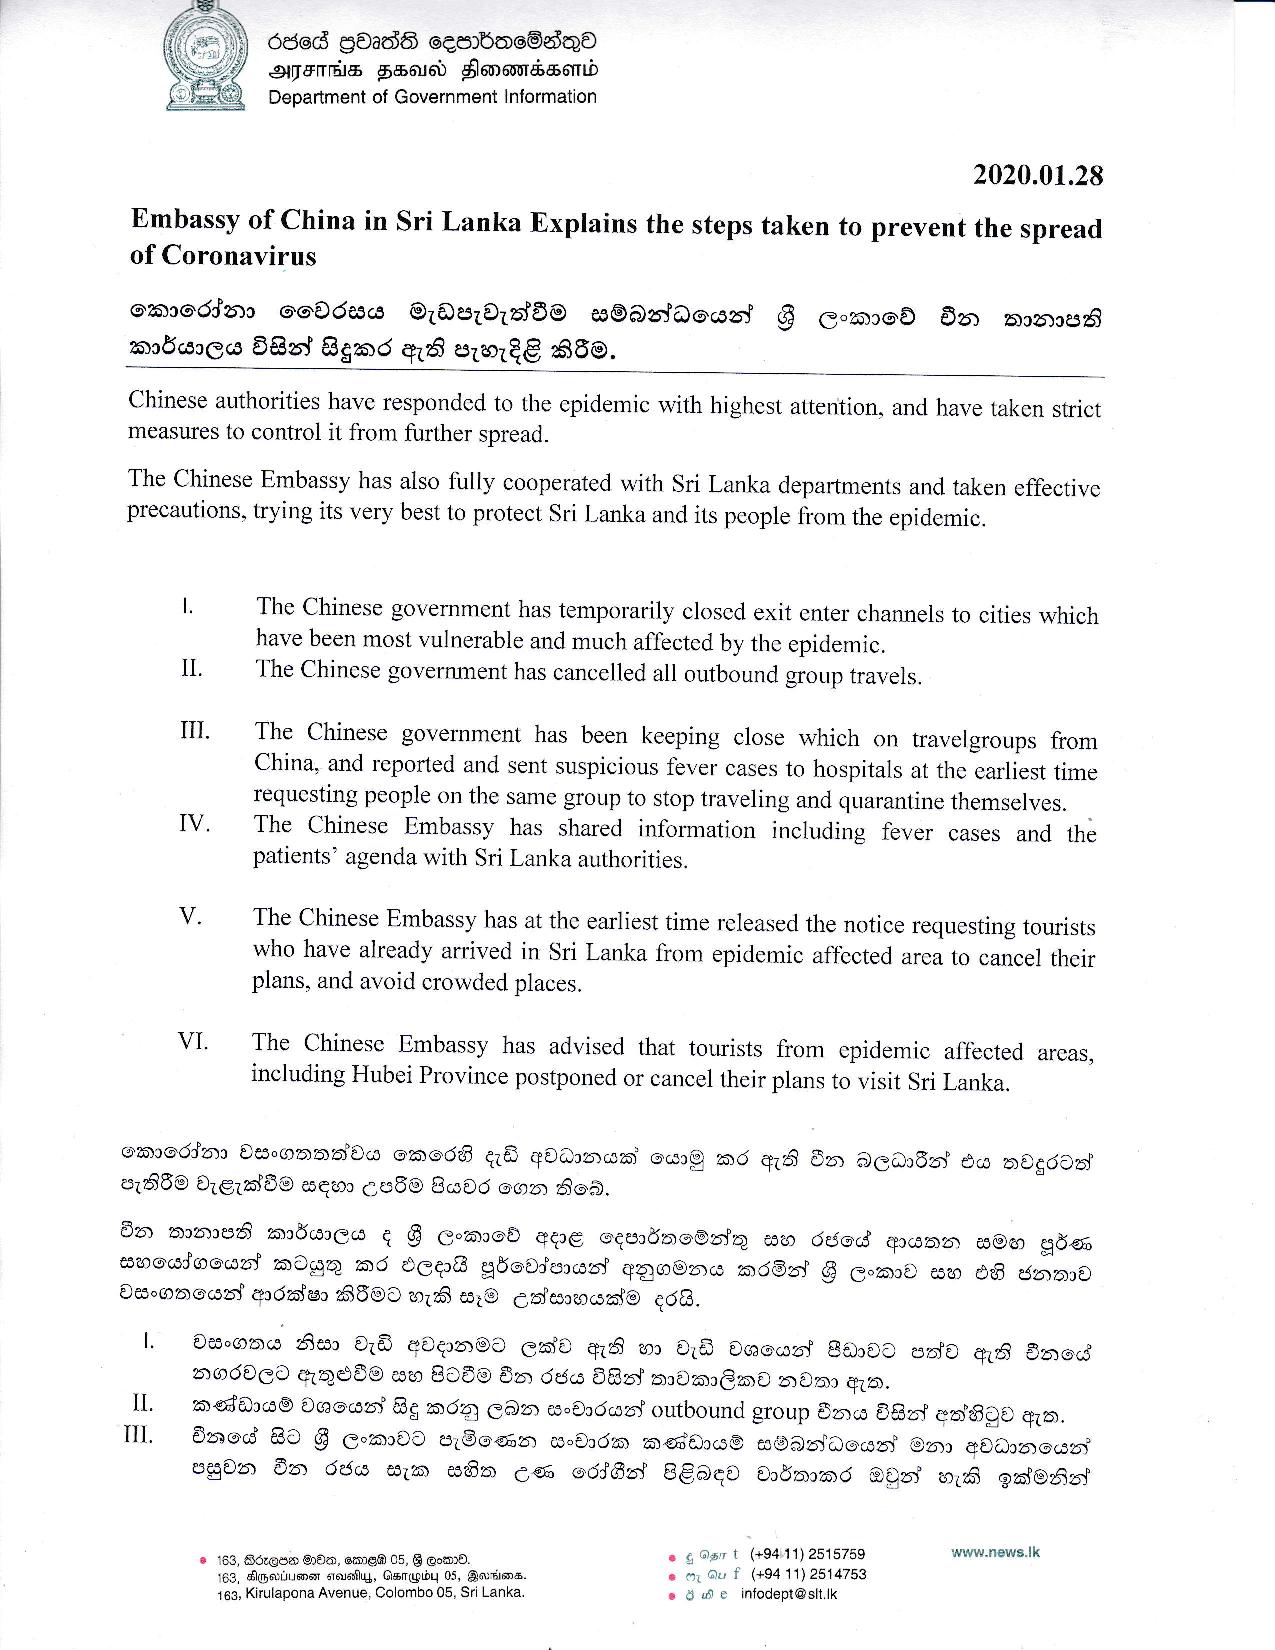 Embassy of China in Sri Lanka Explains the steps taken to prevent the spread of Coronavirus. 28.01 page 001